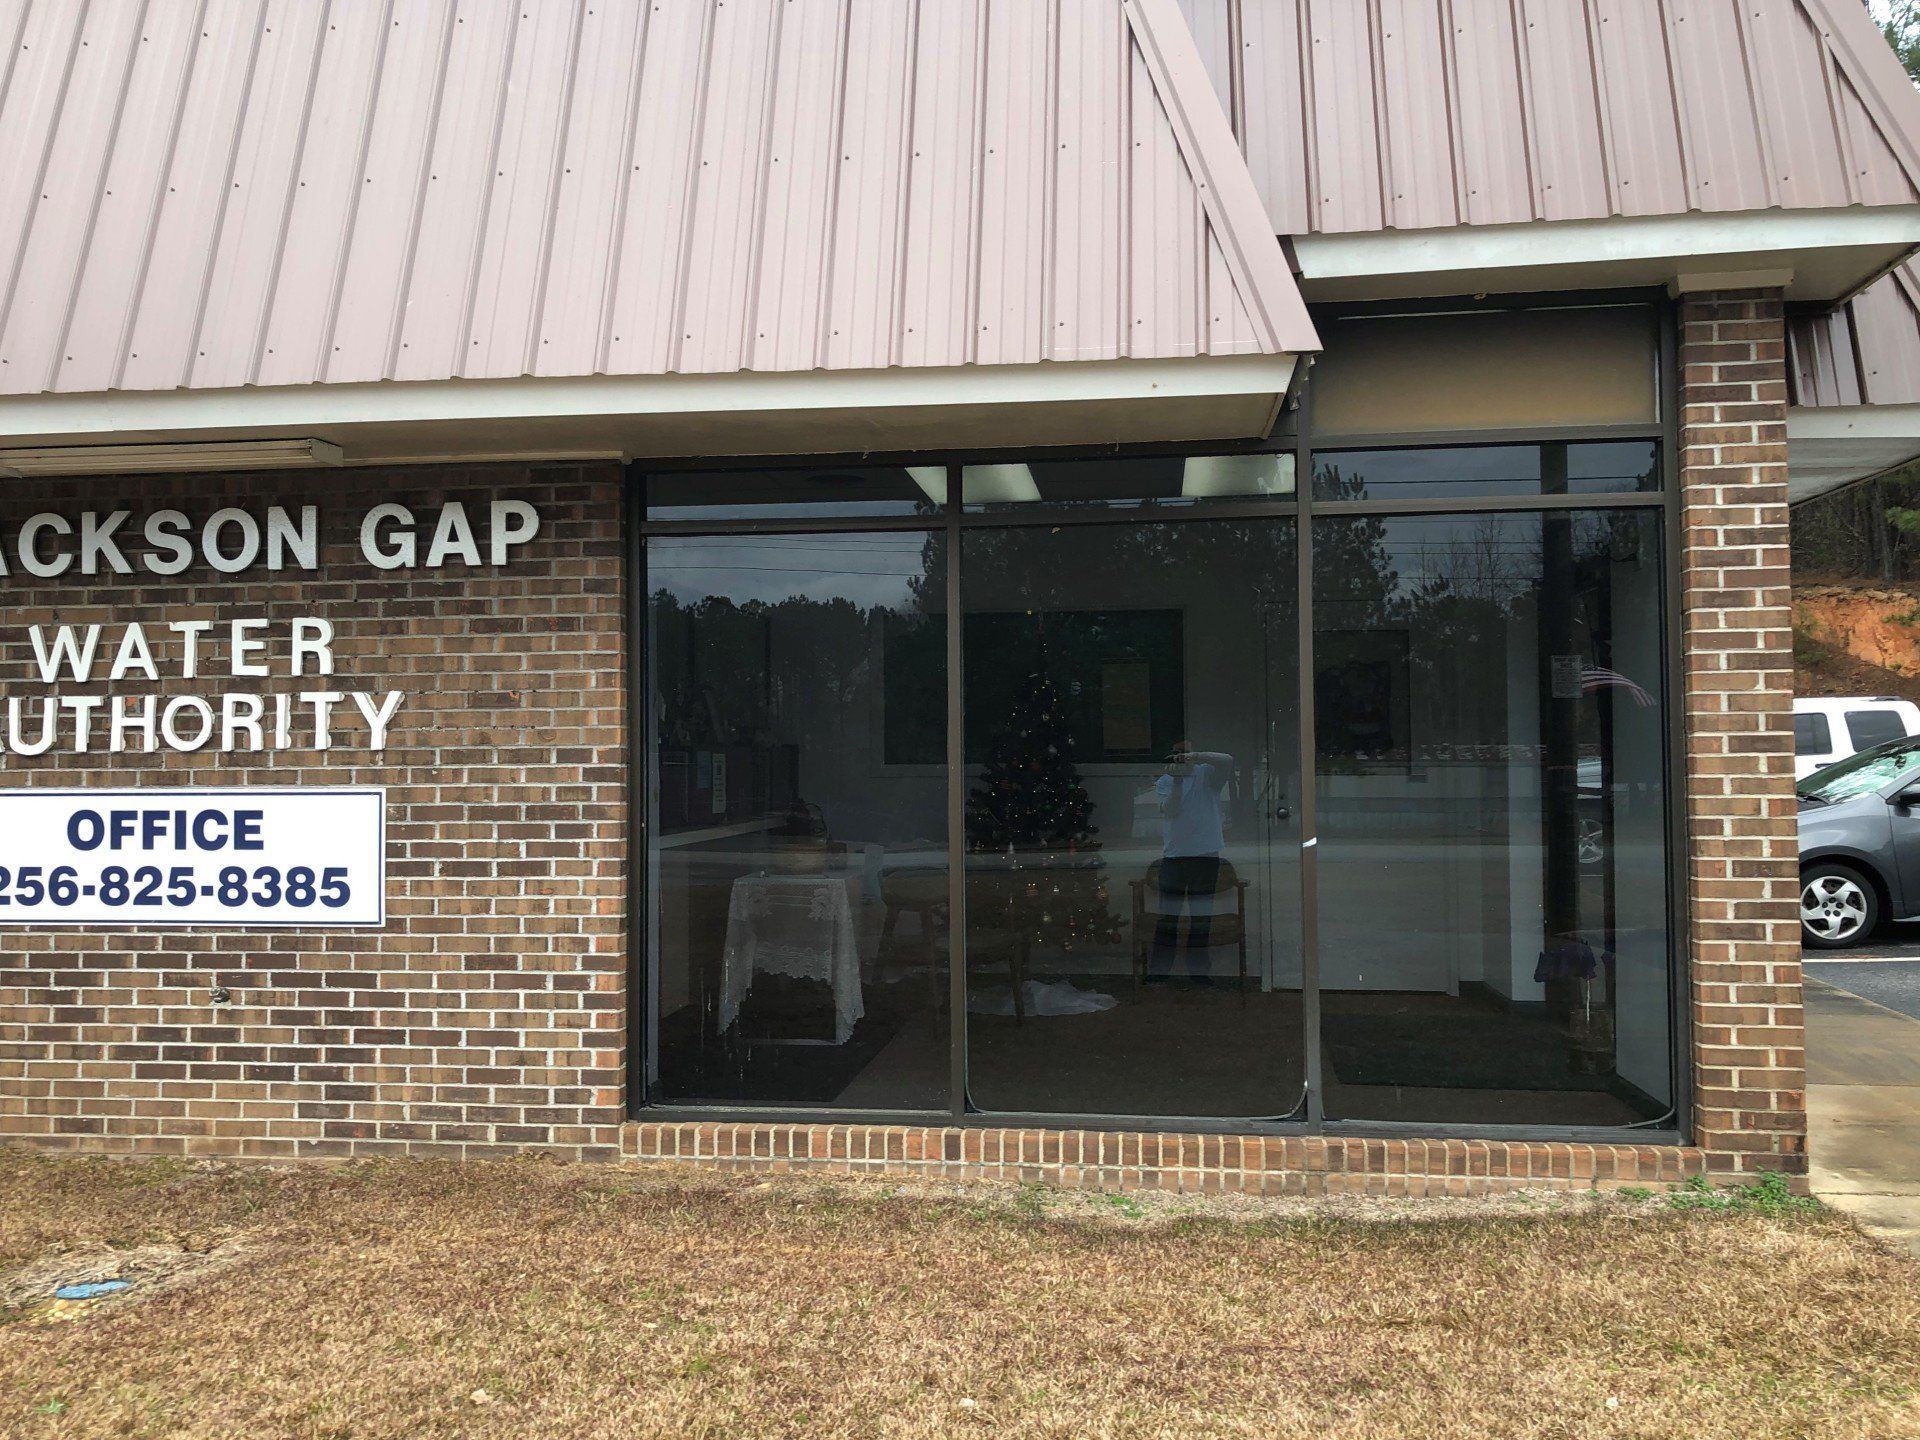 Commercial tinting in Birmingham AL to Upper Central AL - SPF Preferred Tint was installed at the Jacksons Gap Water Authority in Upper Central AL